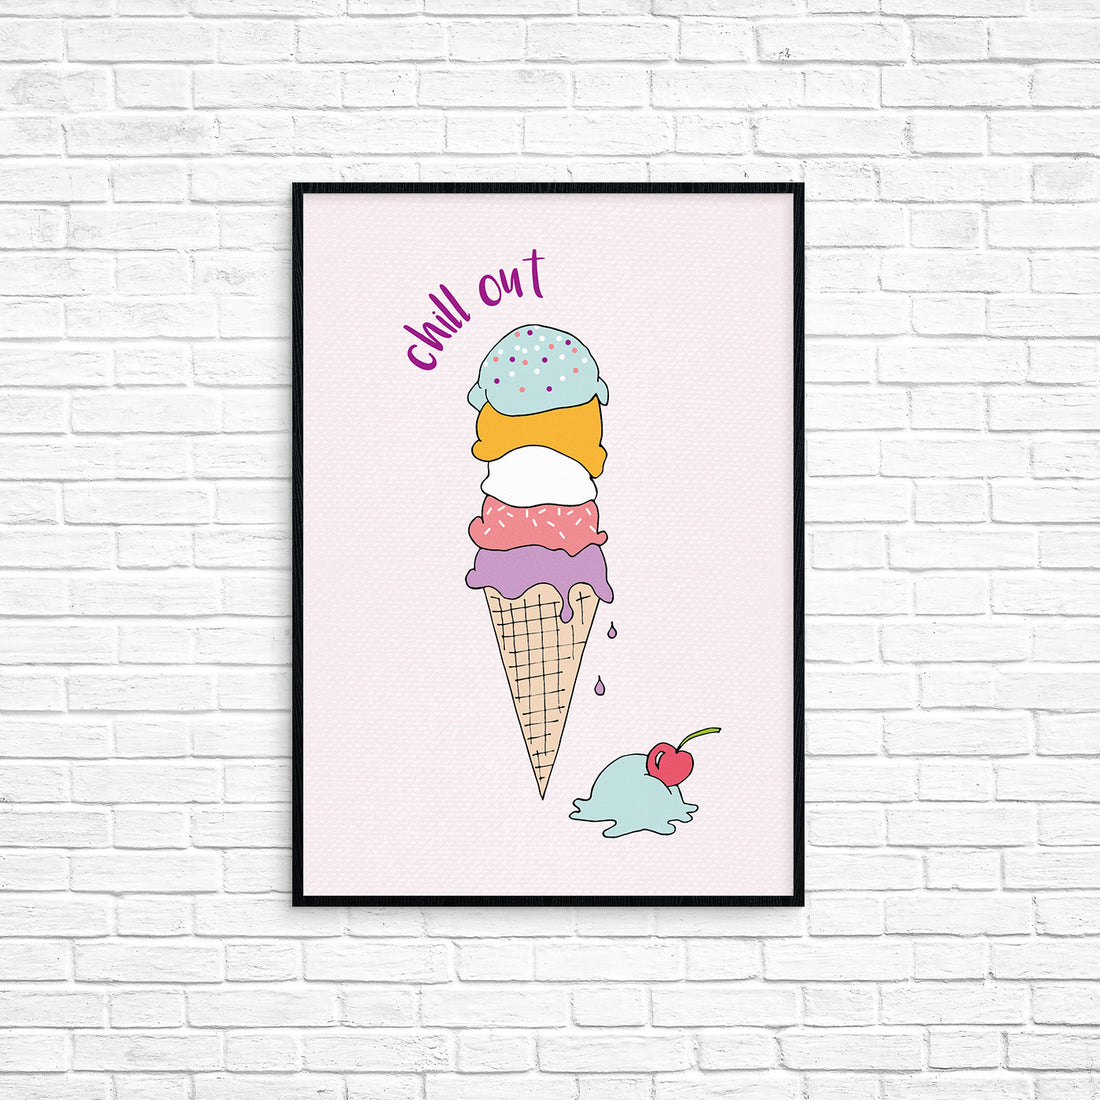 Chill out printable wall art